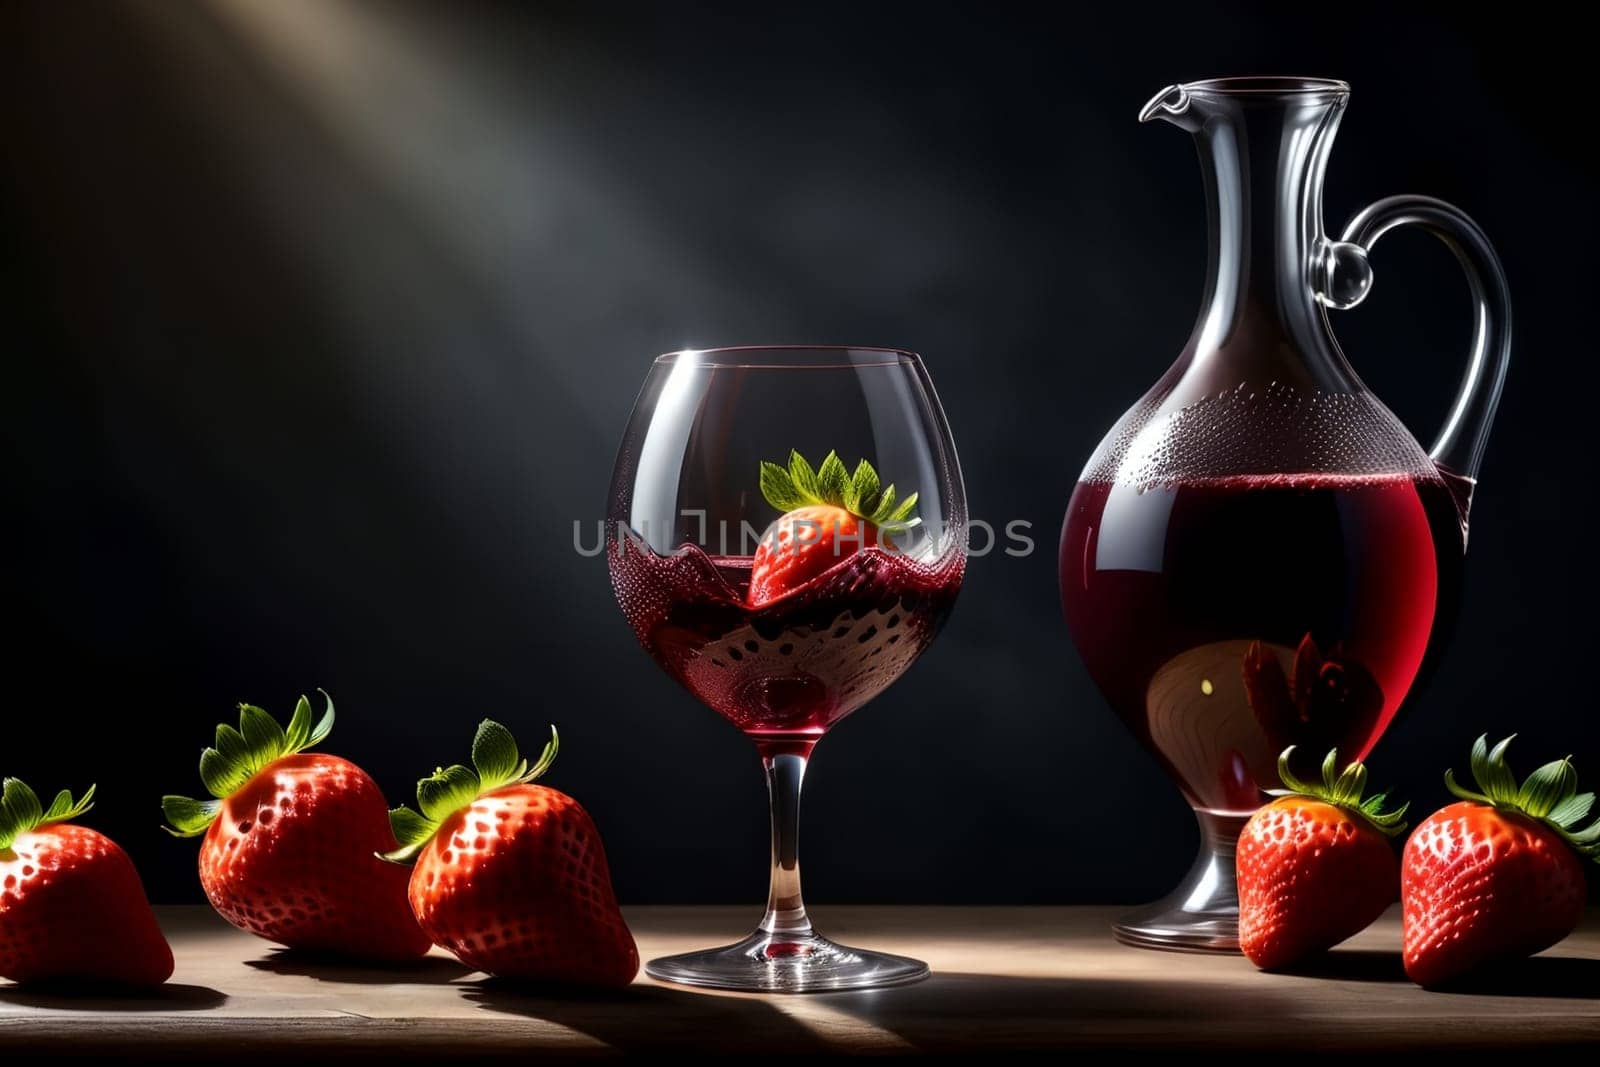 strawberry red wine in a glass and decanter against the background of ripe strawberries on the table.